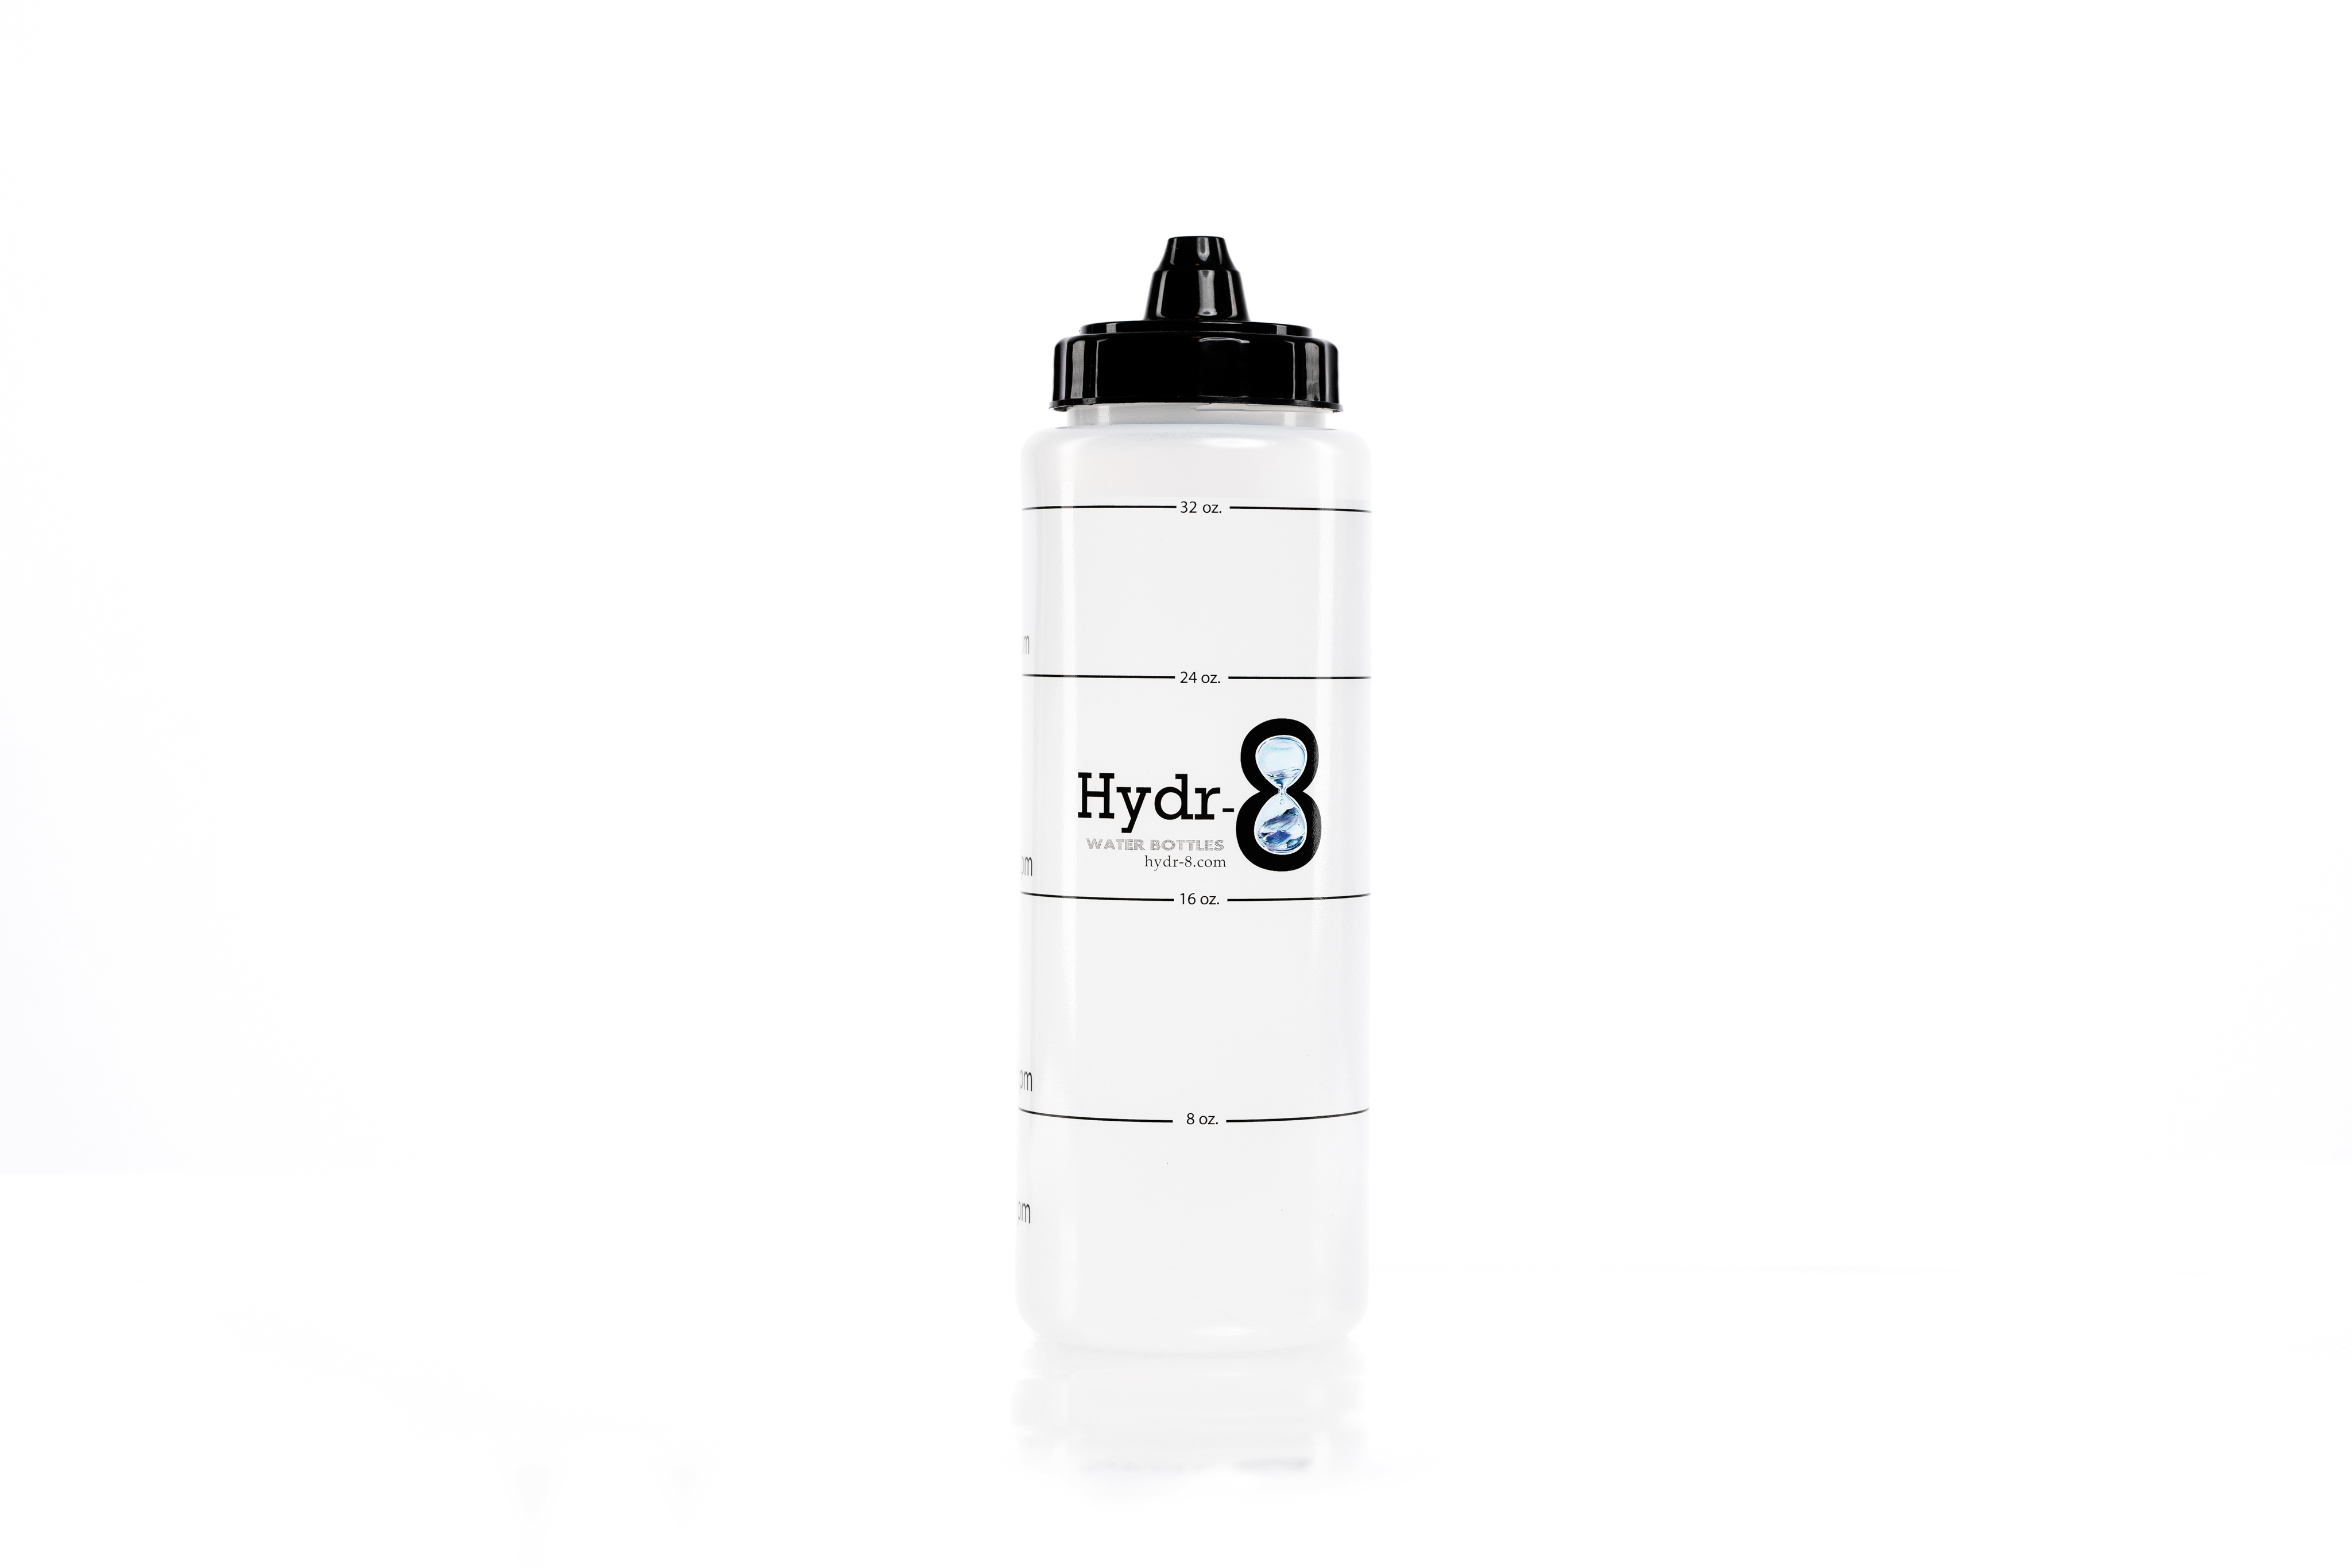 https://hydr-8.com/wp-content/uploads/2018/10/hydr8-squeeze-bottle-front.jpg